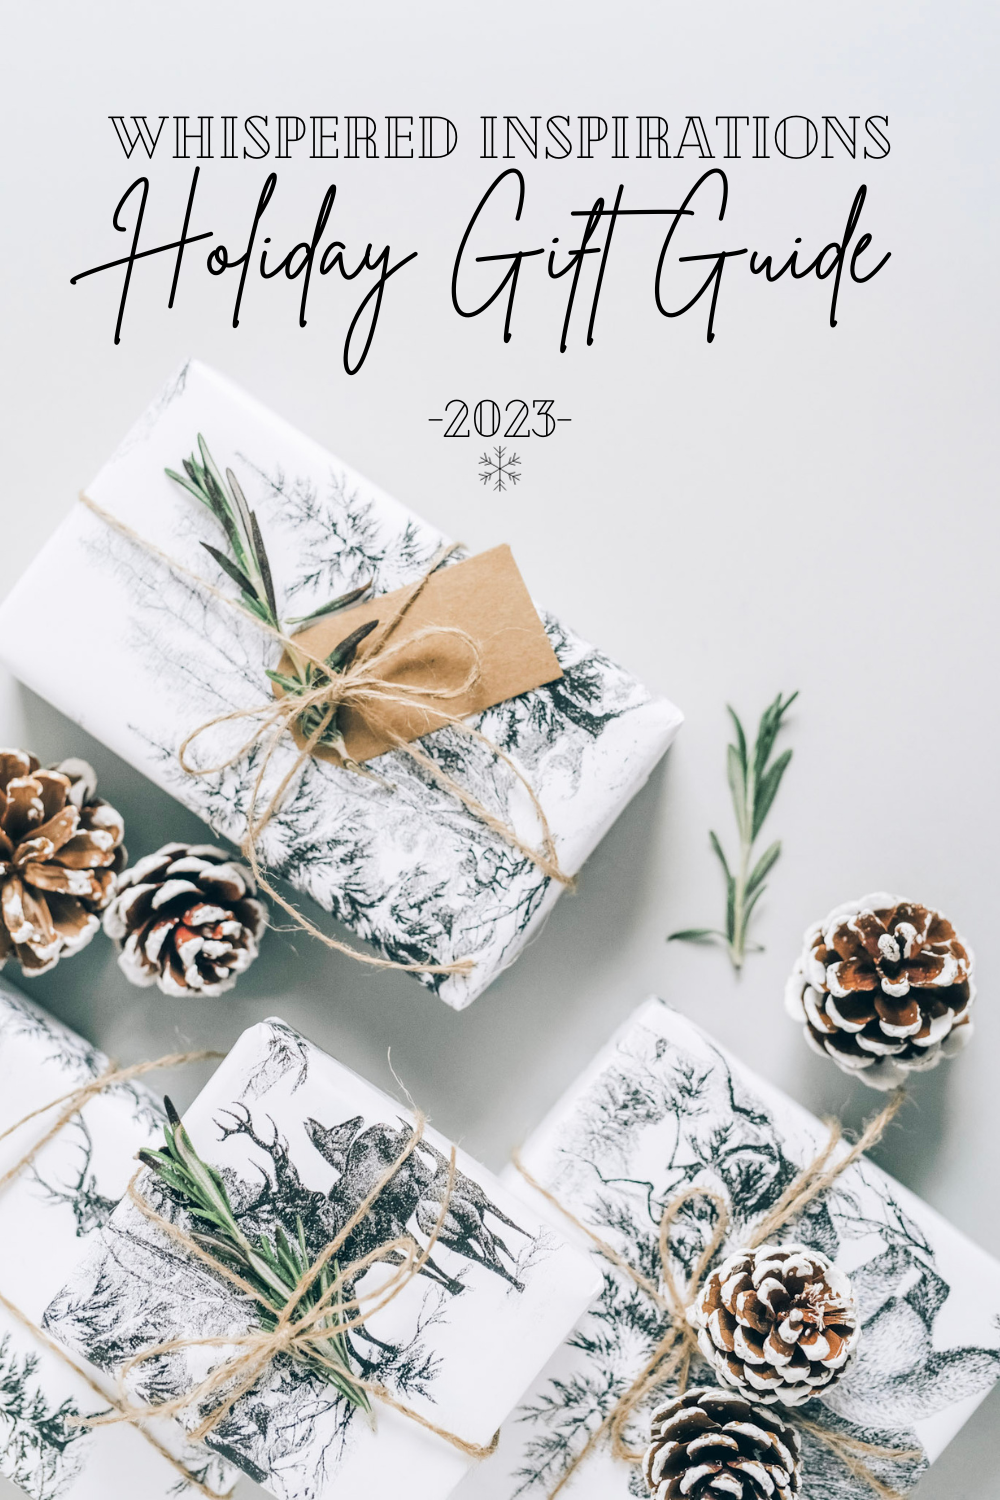 Beautiful gifts are wrapped in black and white wrapping with printed landscape. They are adorned with acorns and greenery and tied with twine. A banner reads, "Whispered Inspirations, Holiday Gift Guide, 2021.